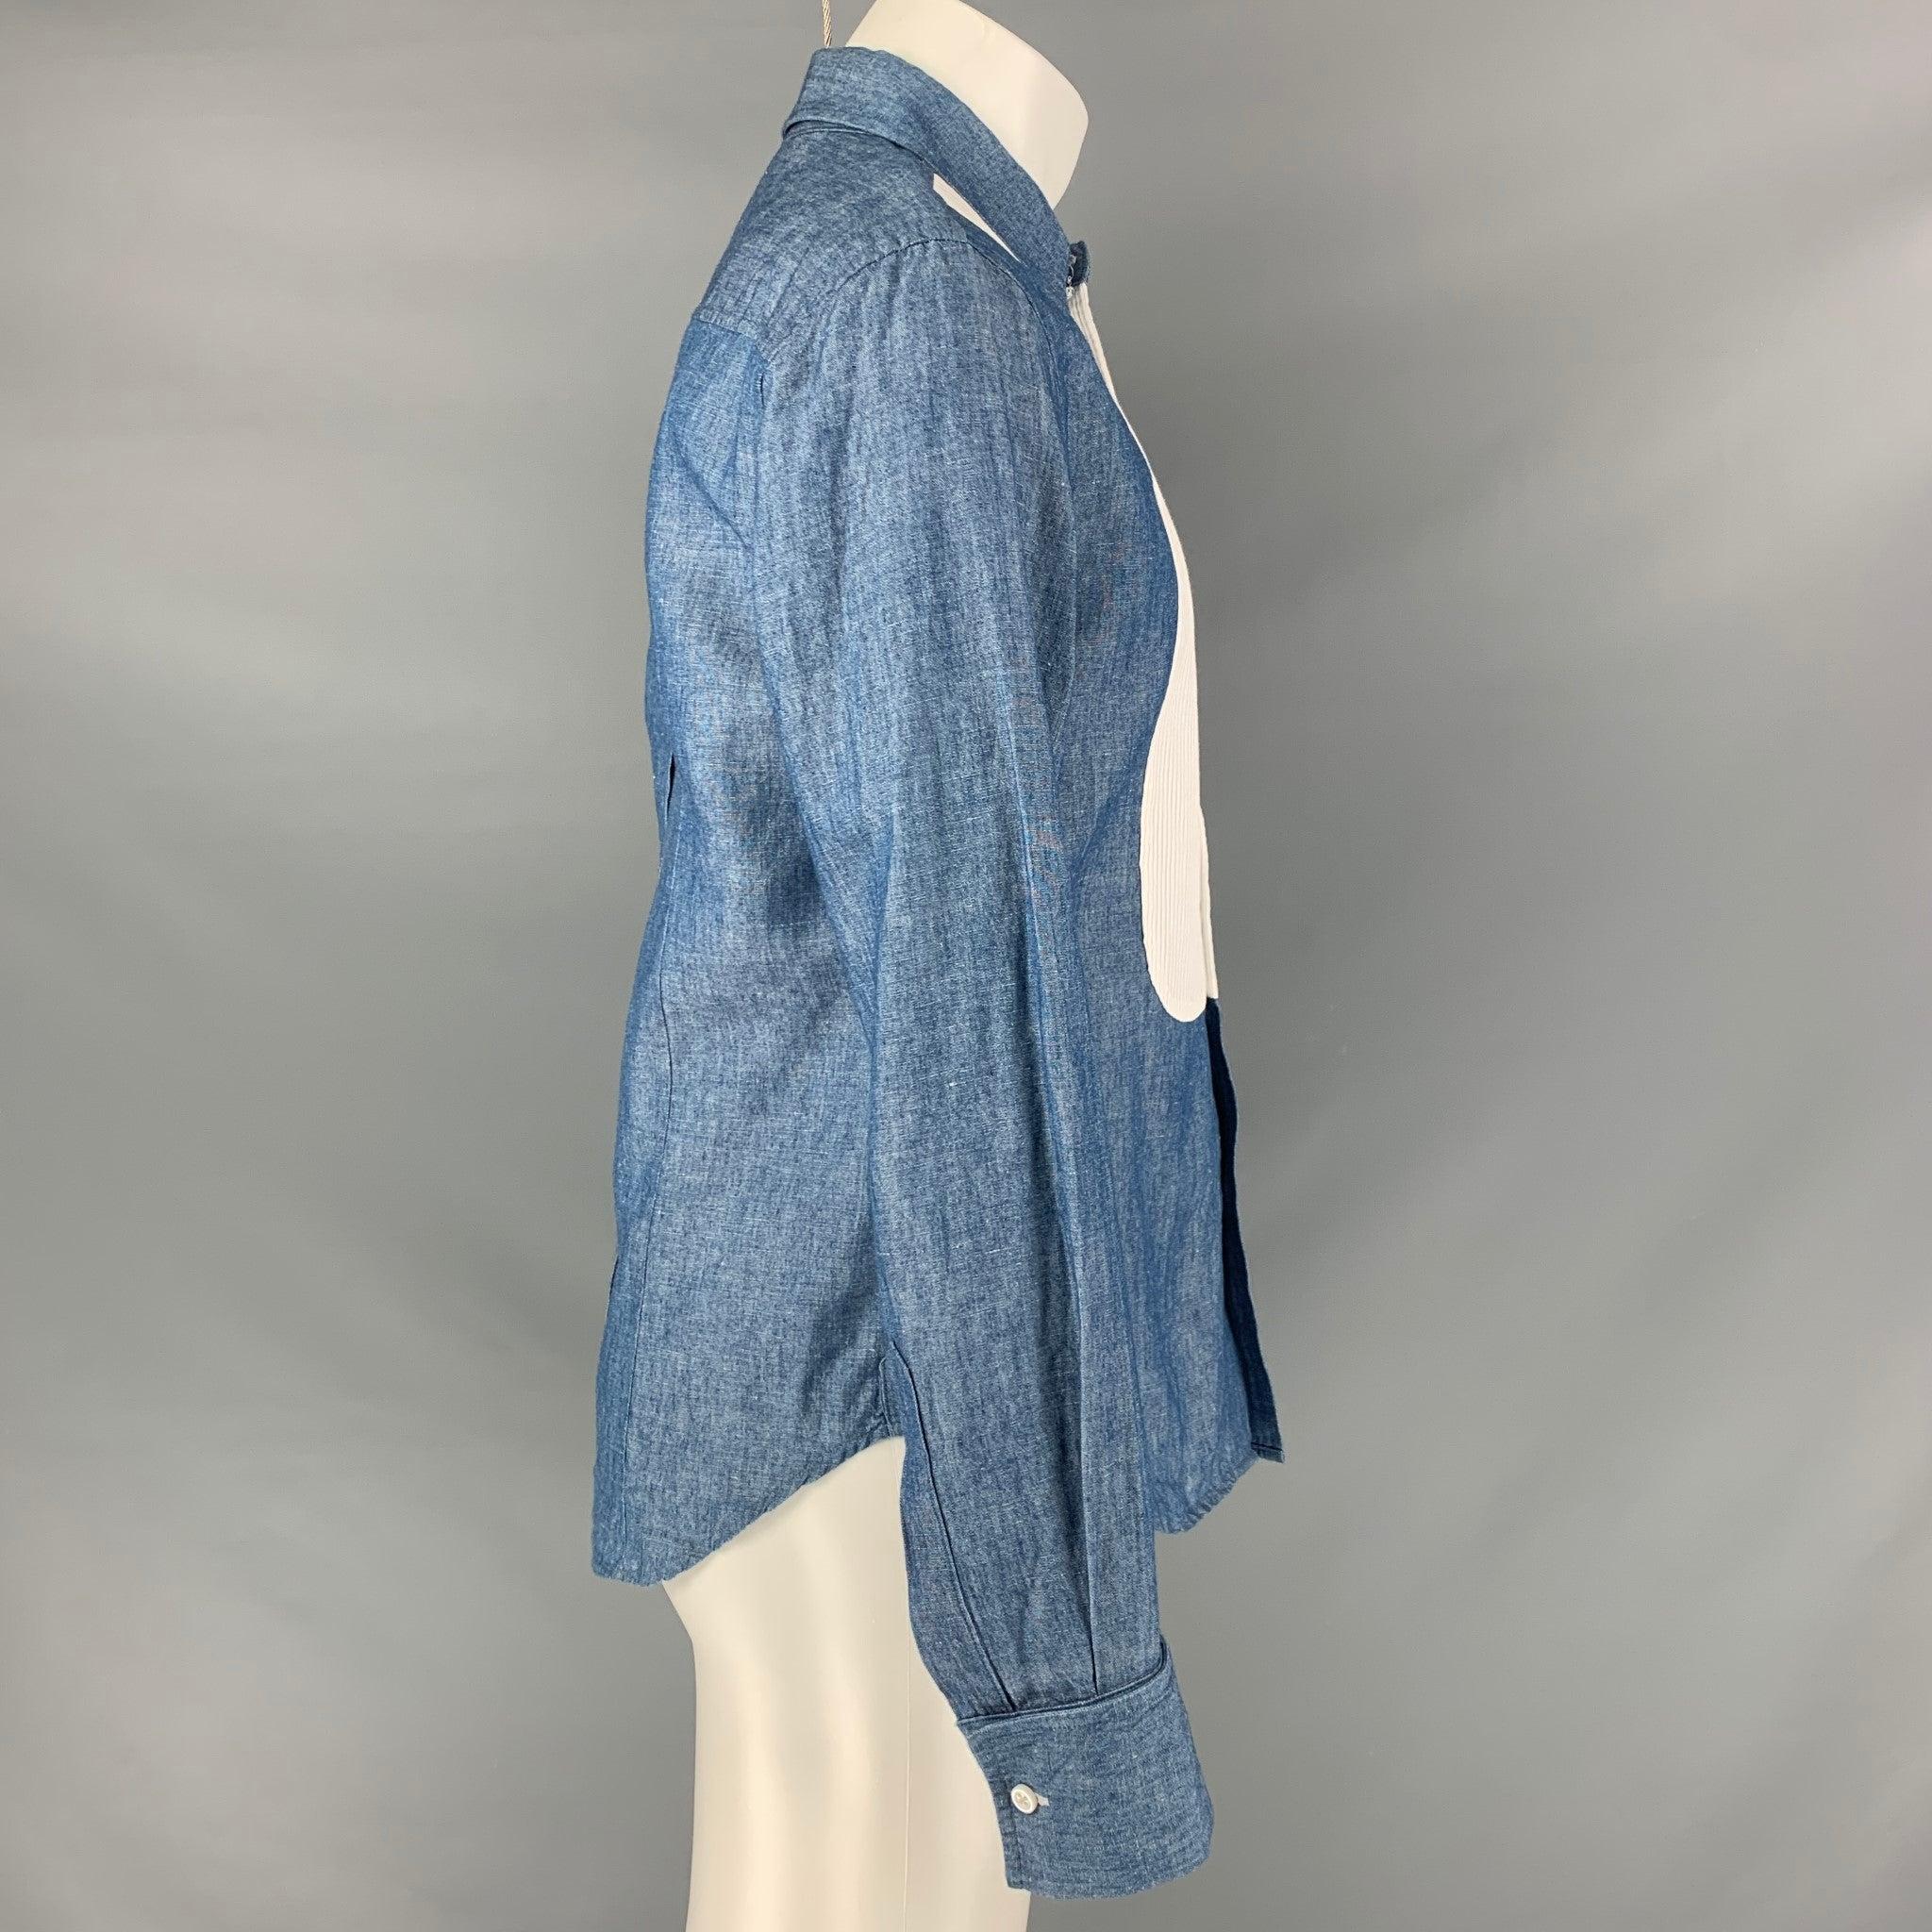 BAND OF OUTSIDERS long sleeve shirt comes in a blue chambray cotton fabric featuring a white tuxedo detail at front, straight collar, and a button down closure. Made in USA.Excellent Pre-Owned Condition. 

Marked:   M 

Measurements: 
 
Shoulder: 18